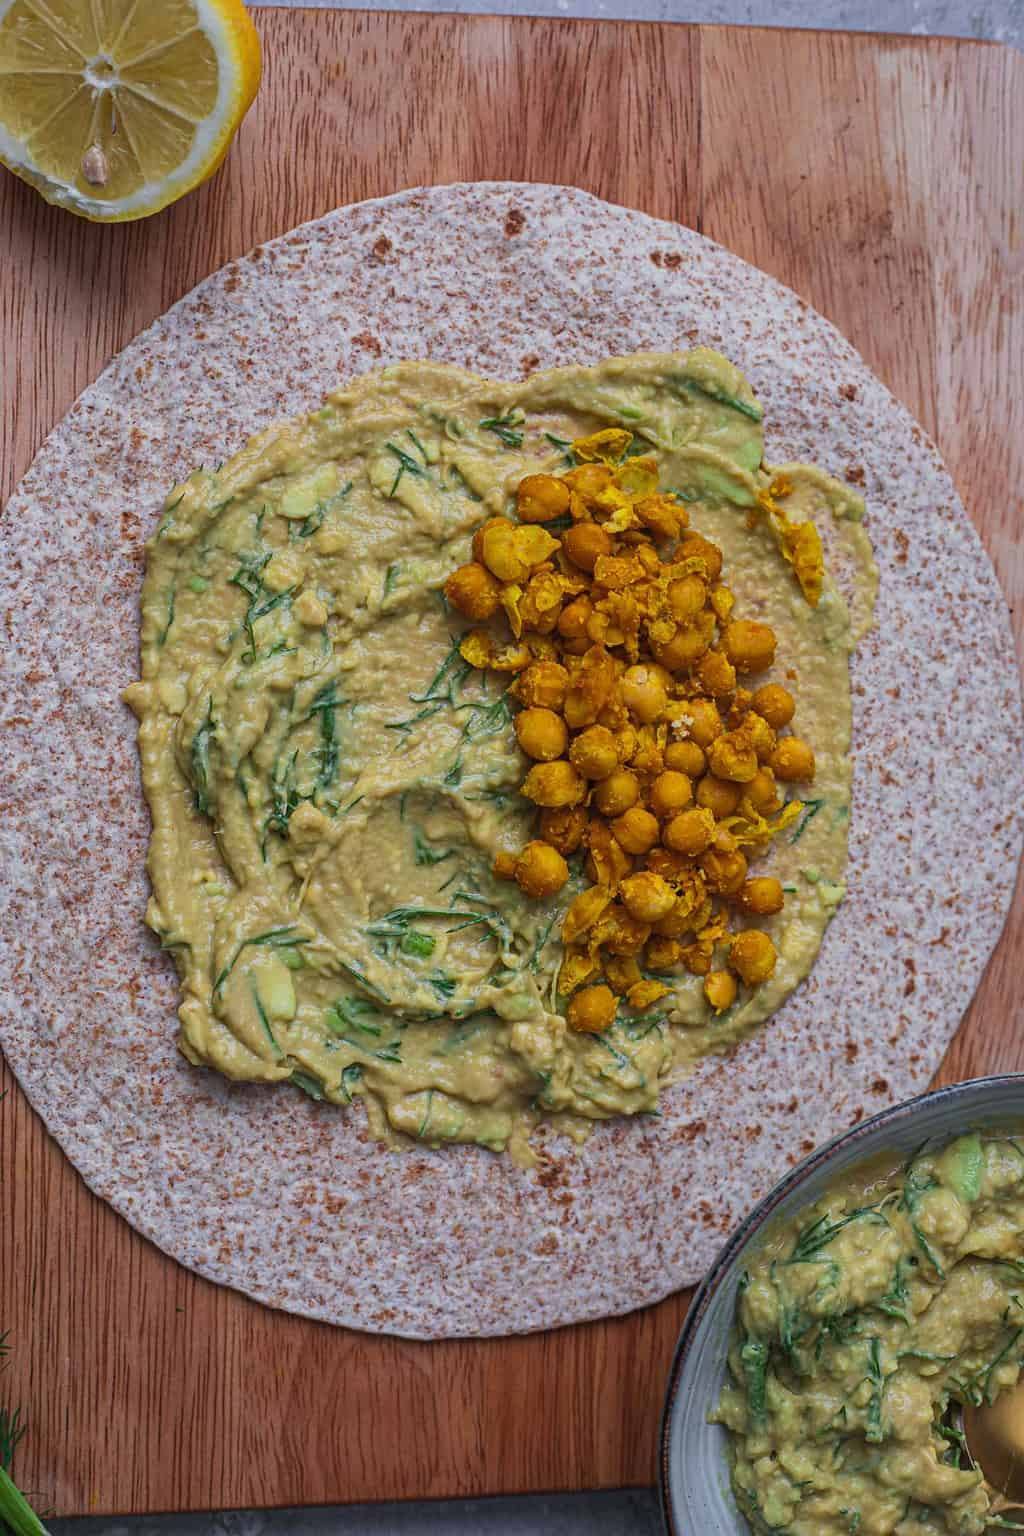 Wrap with avocado spread and chickpeas